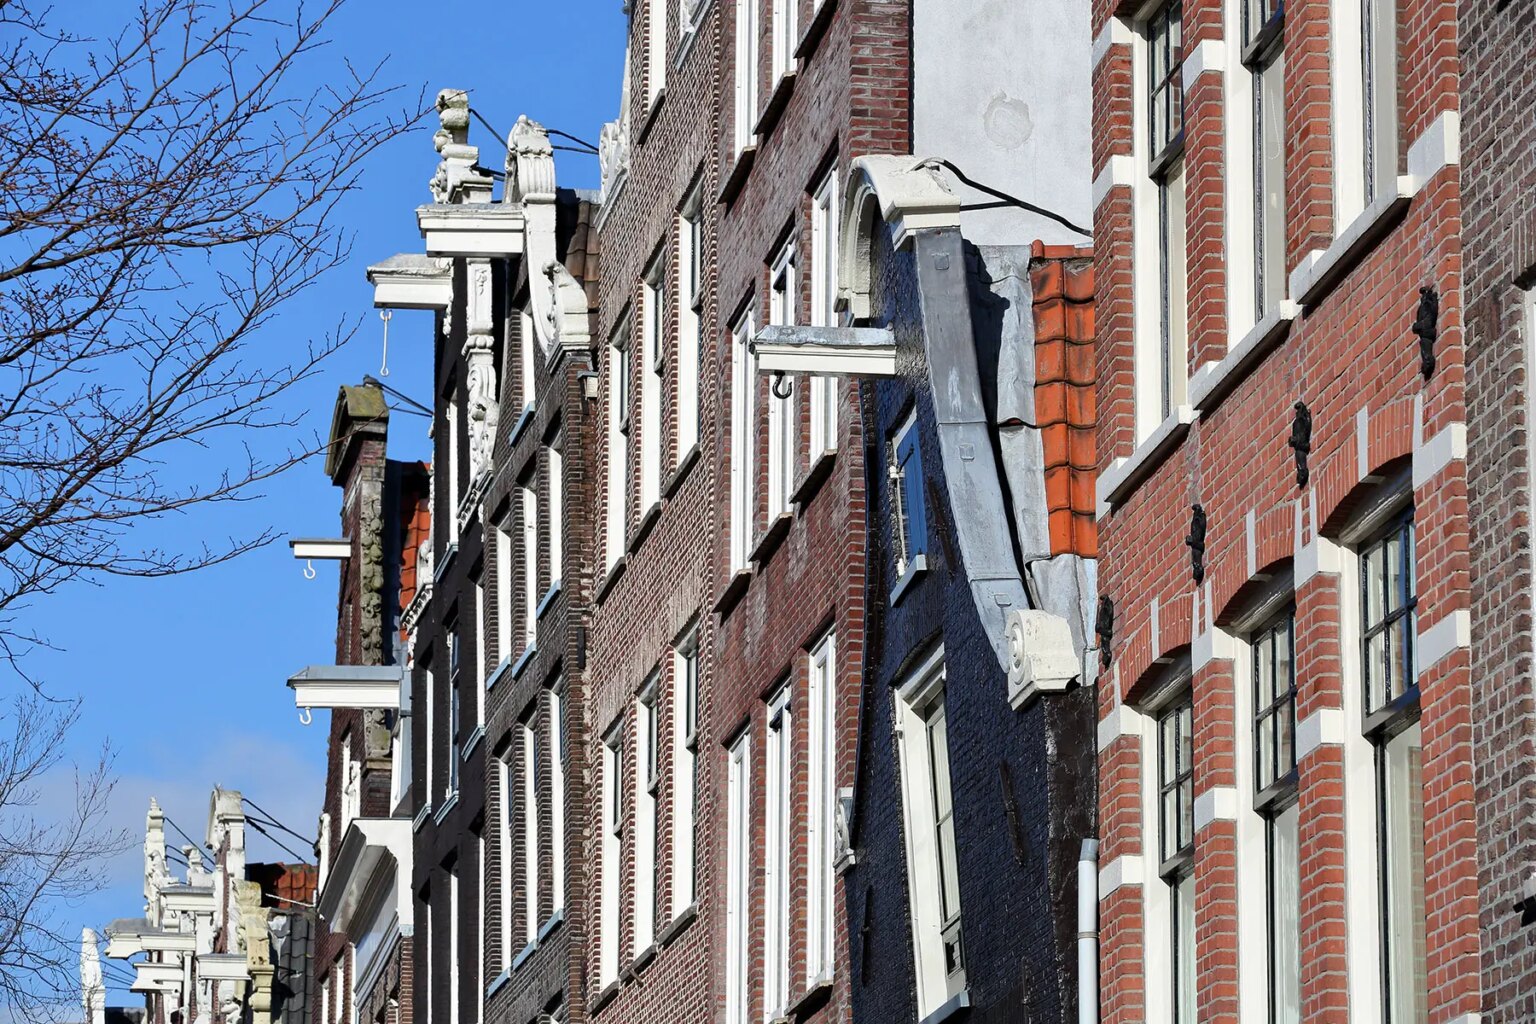 Amsterdam crooked houses